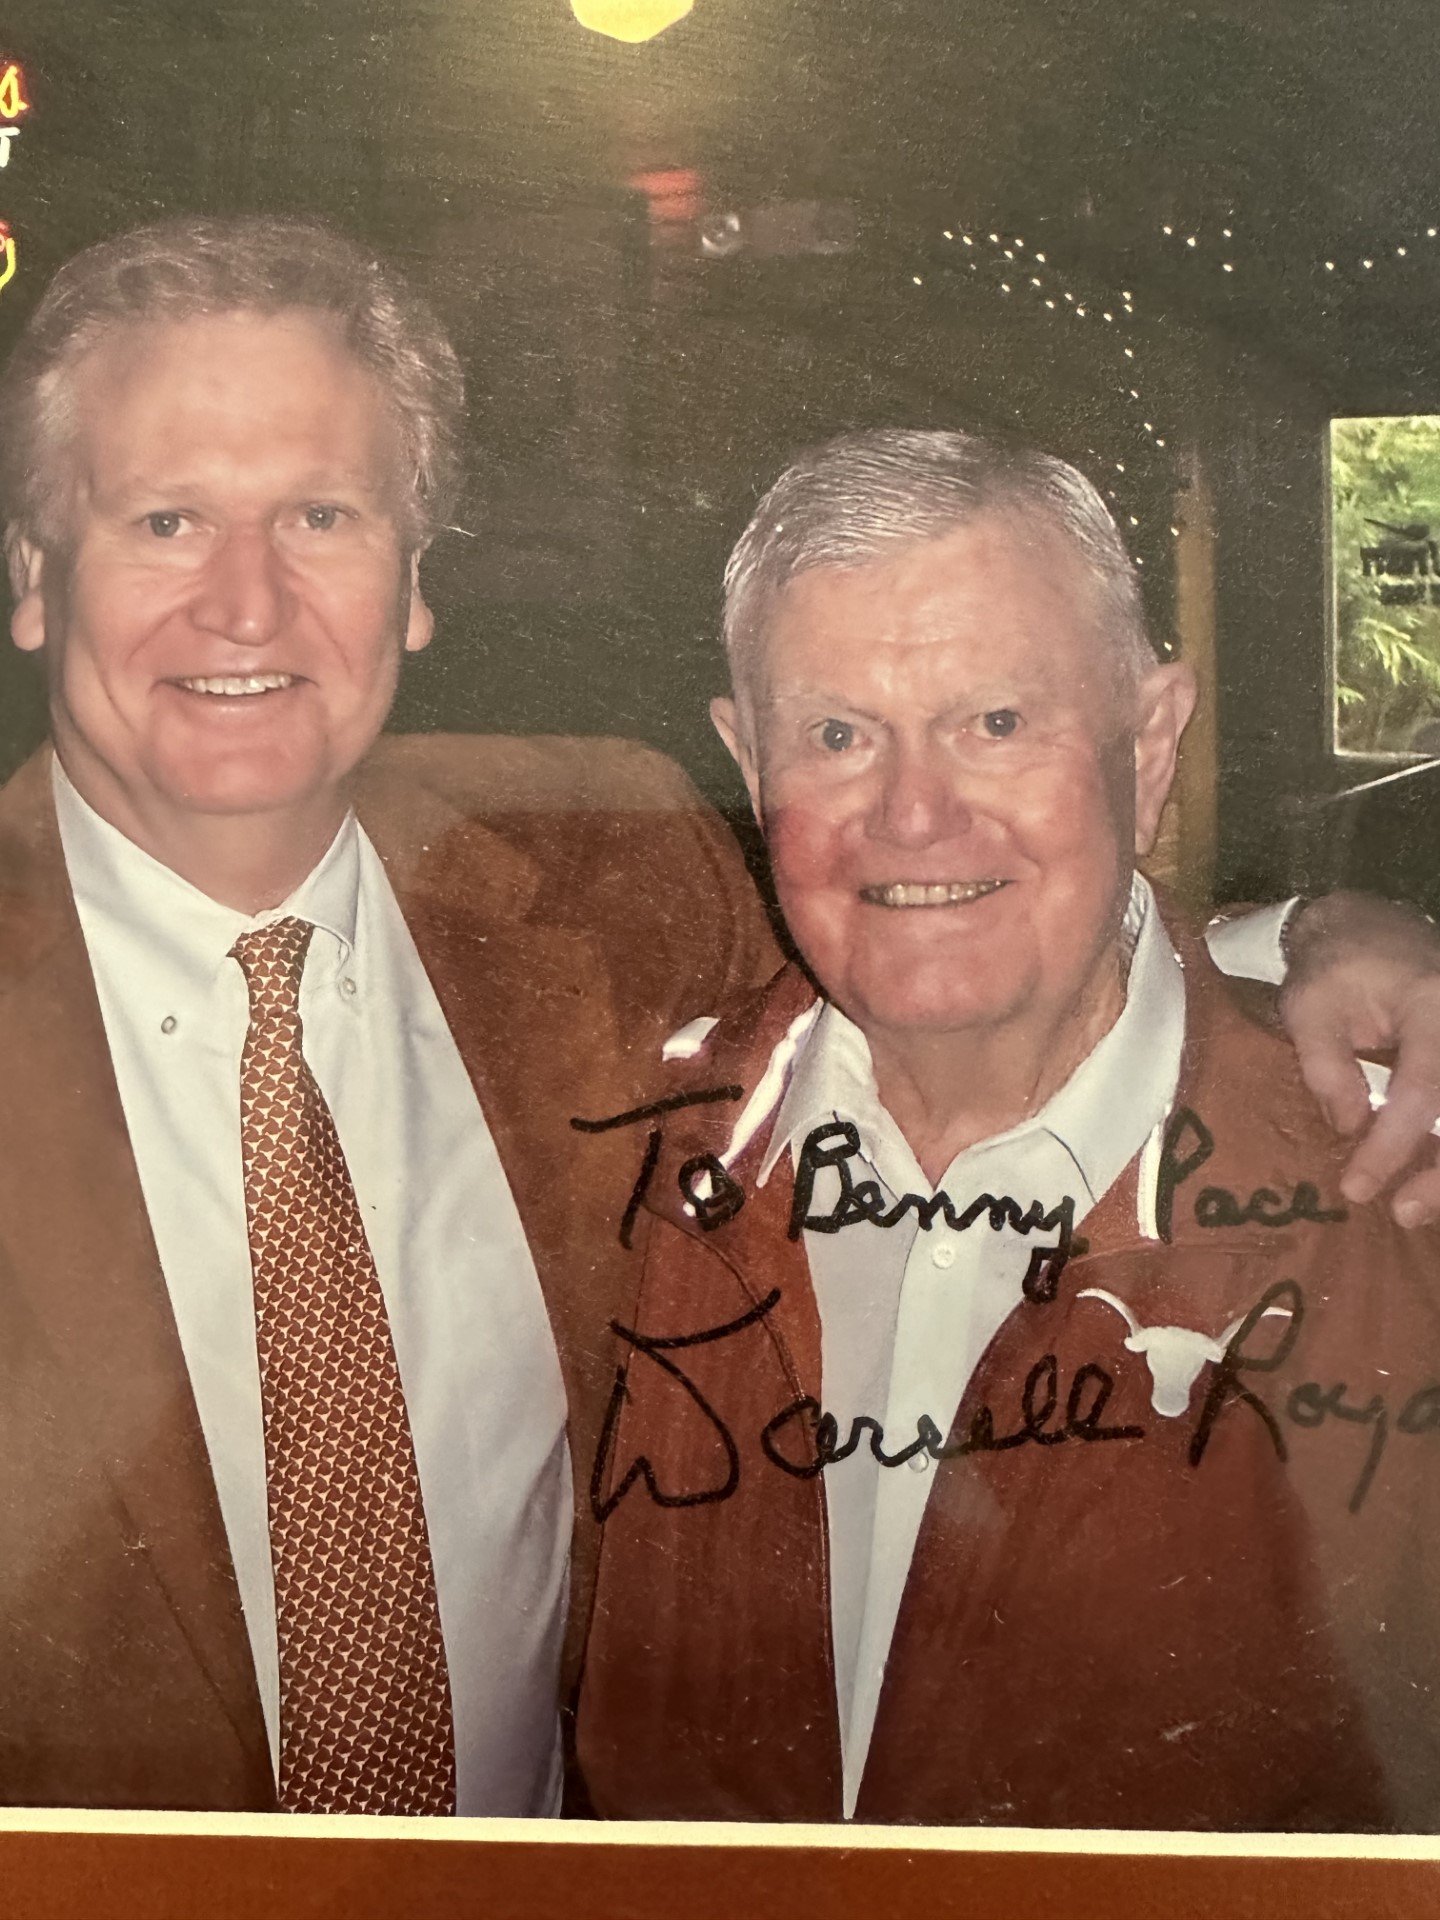  Benny Pace and Darrell Royal 